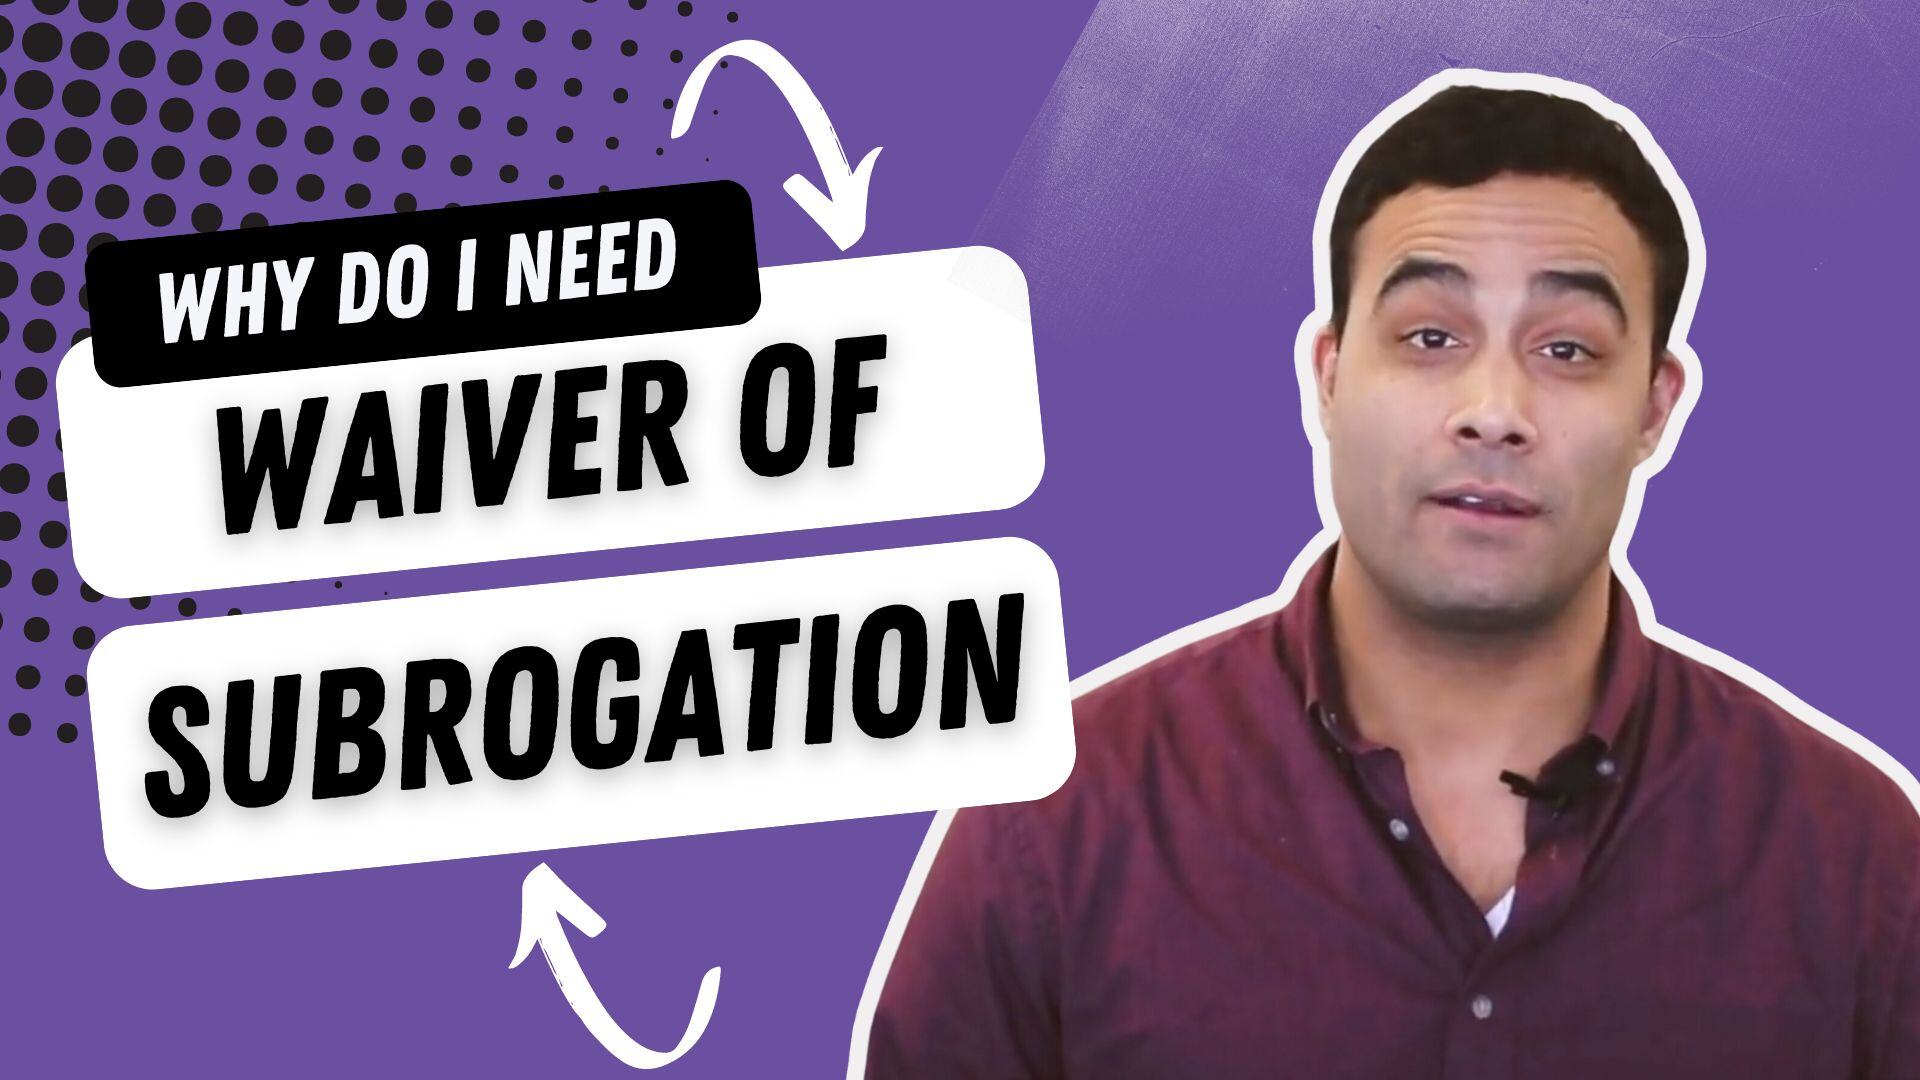 In this video, we are going to understand why a Waiver of Subrogation is important and what it means for your business.